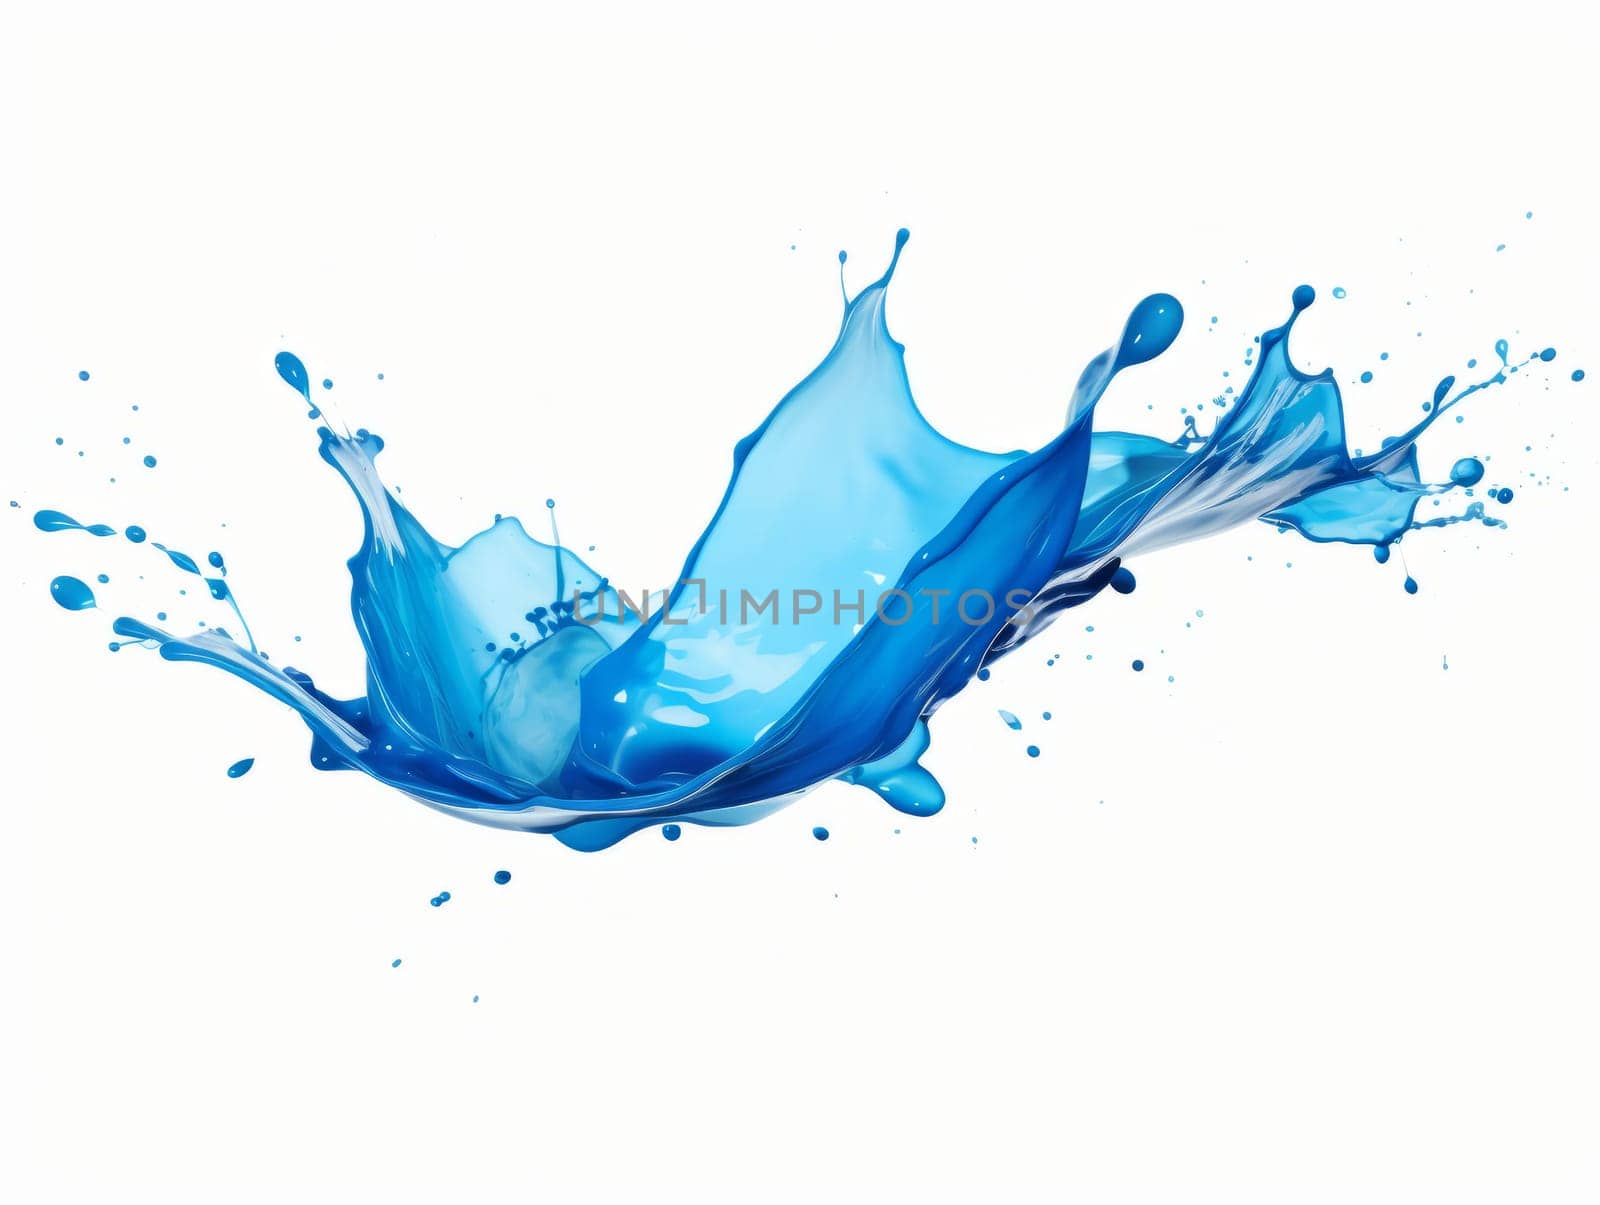 blue paint splash on white background by but_photo